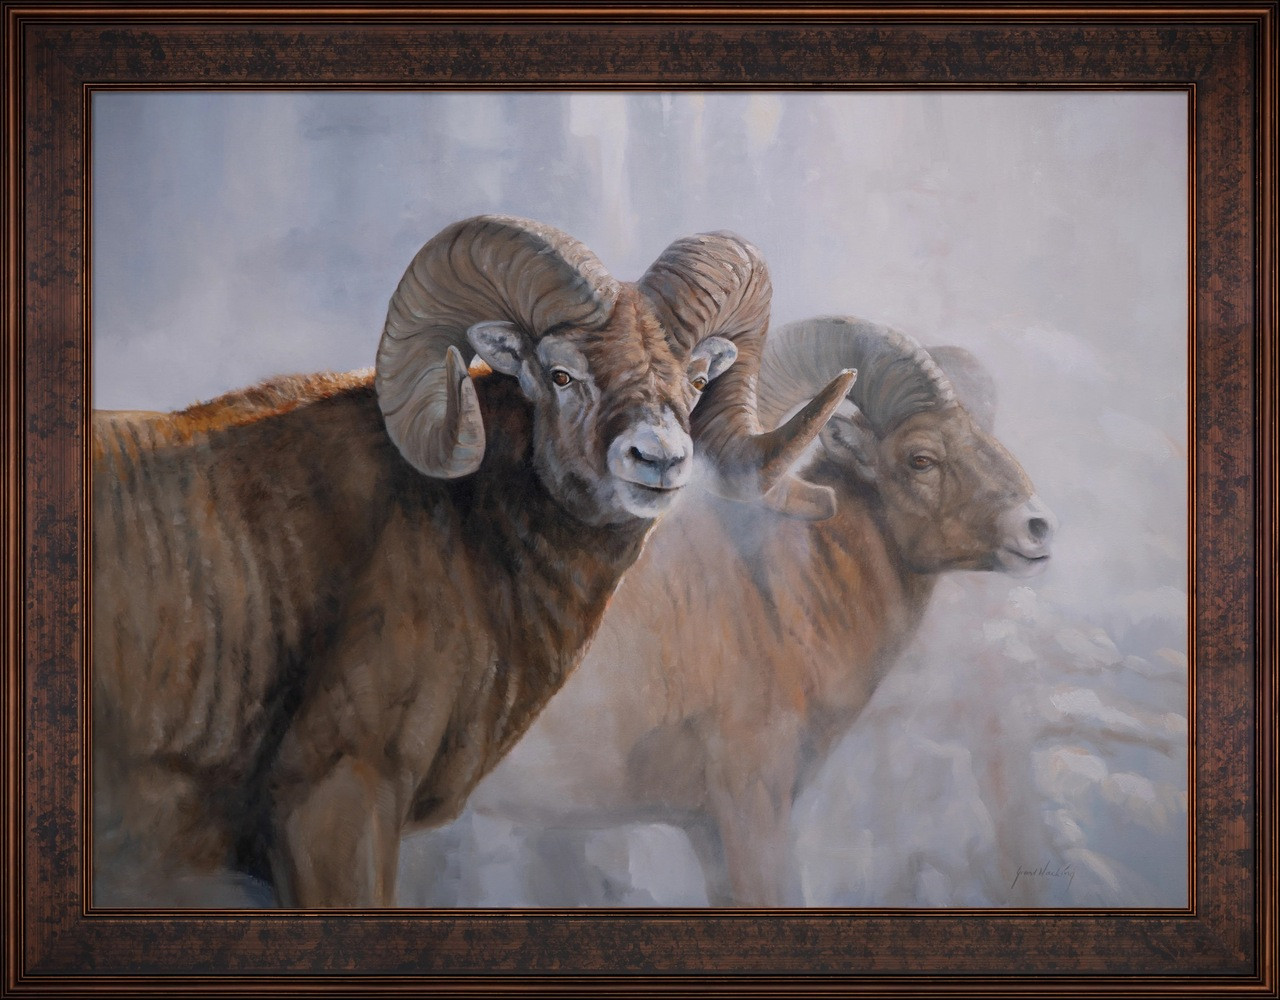 Bighorns in the Mist Framed Original Painting on Canvas by Grant Hacking